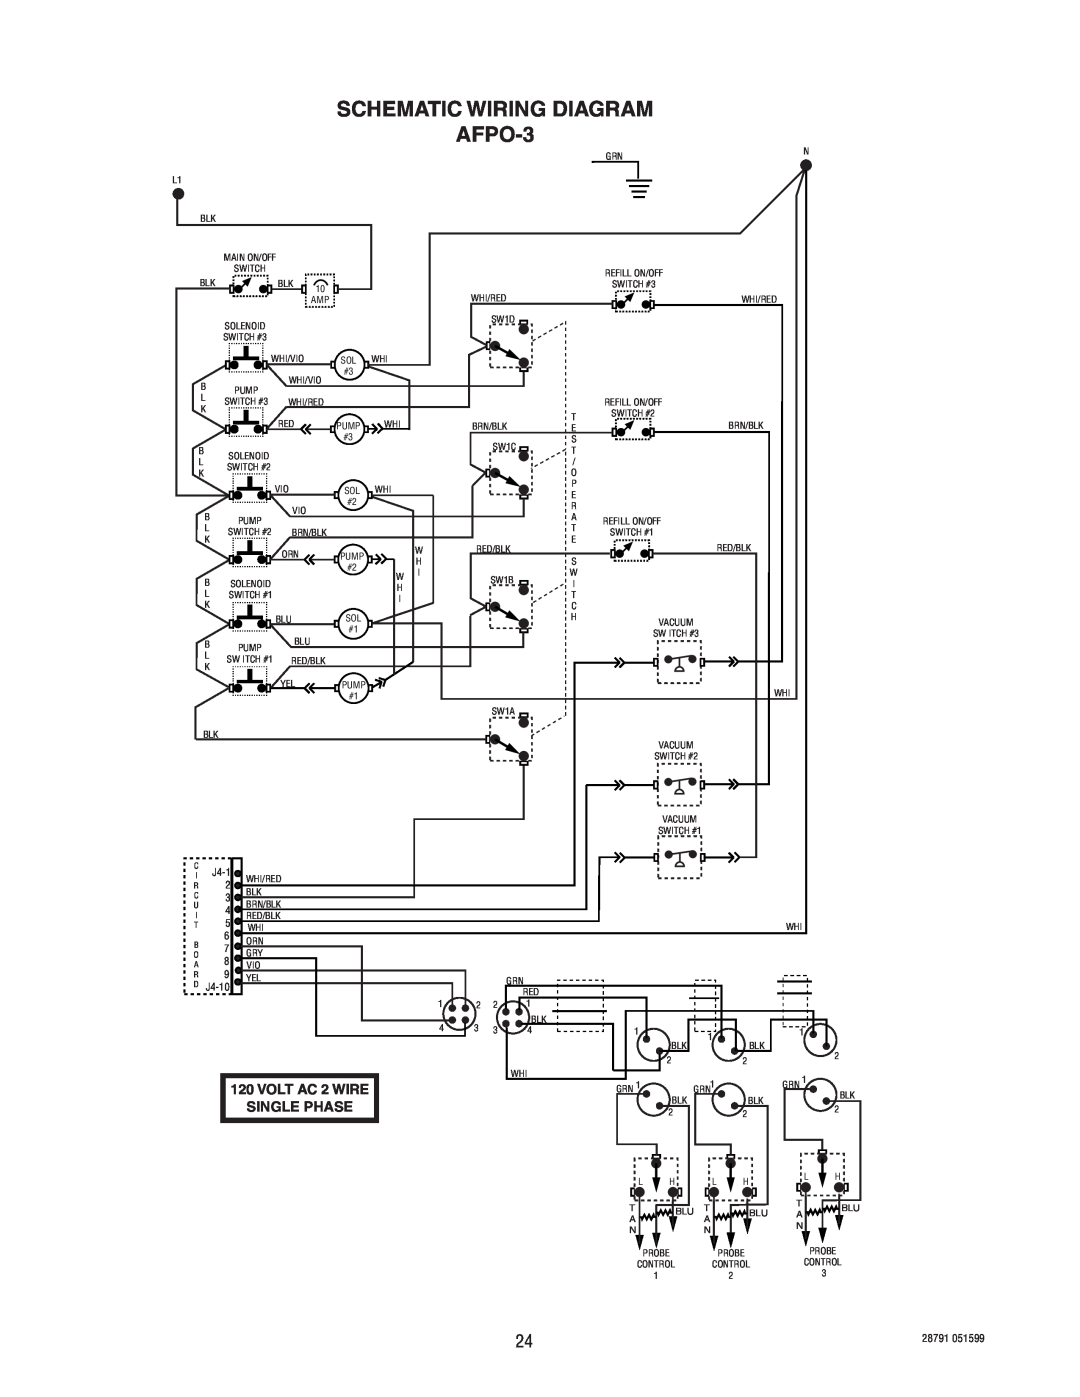 Bunn AFPO-2 SL service manual SCHEMATIC WIRING DIAGRAM AFPO-3, VOLT AC 2 WIRE, Single Phase, J4-10, 28791 